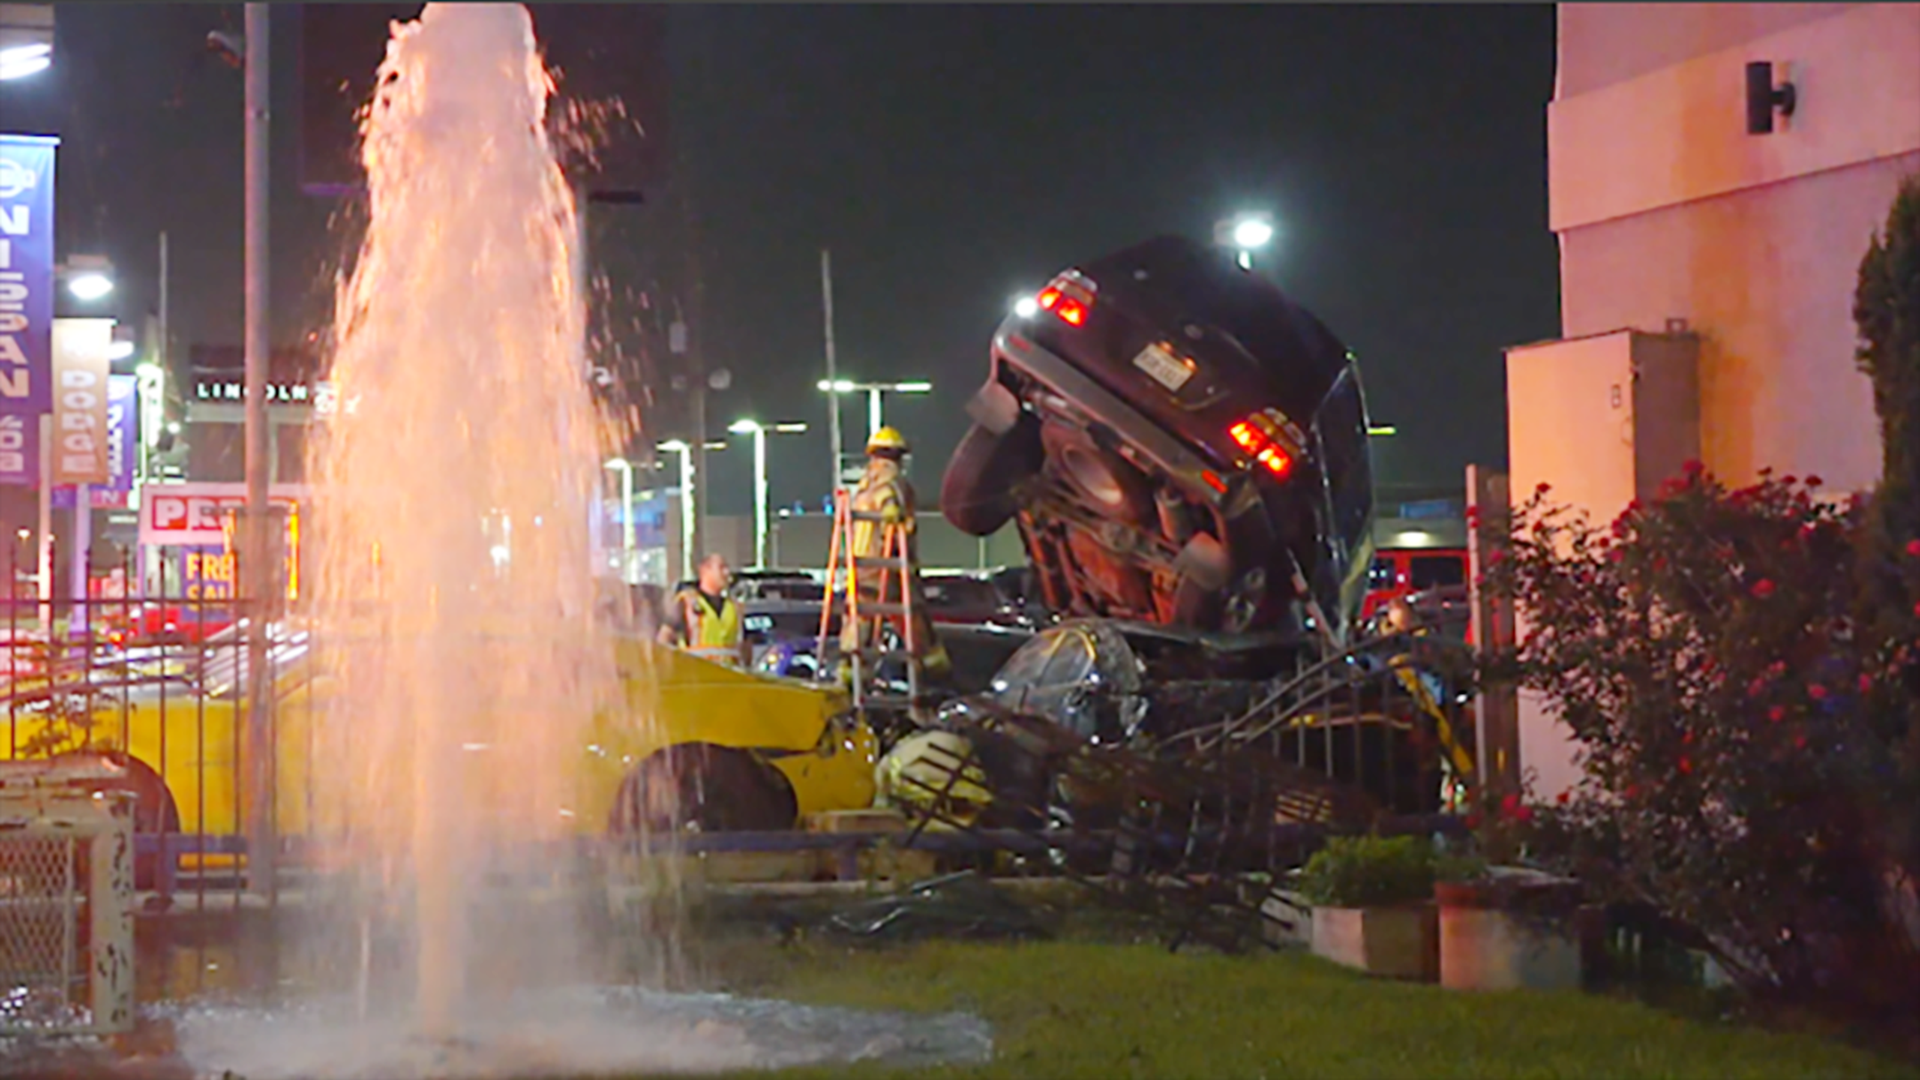 Around 8:30 p.m. on April 20, 2020, a woman was in the southbound lanes of the North Freeway near Louetta when she crashed into a fire hydrant and then over a fence.